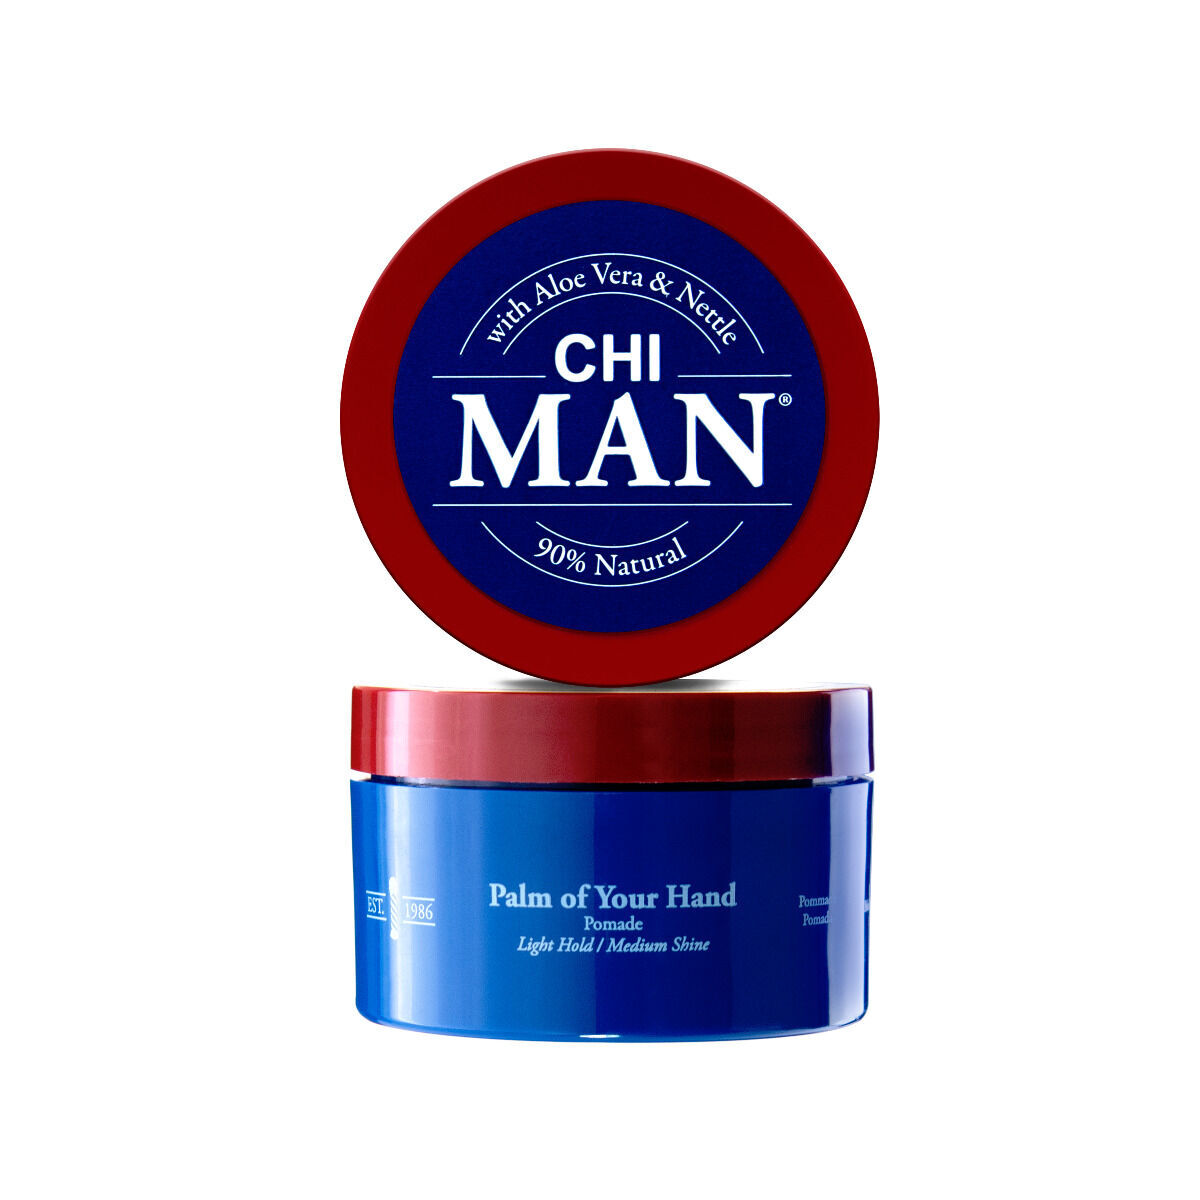 Chi MAN Palm of Your Hand - Pomade 85gr